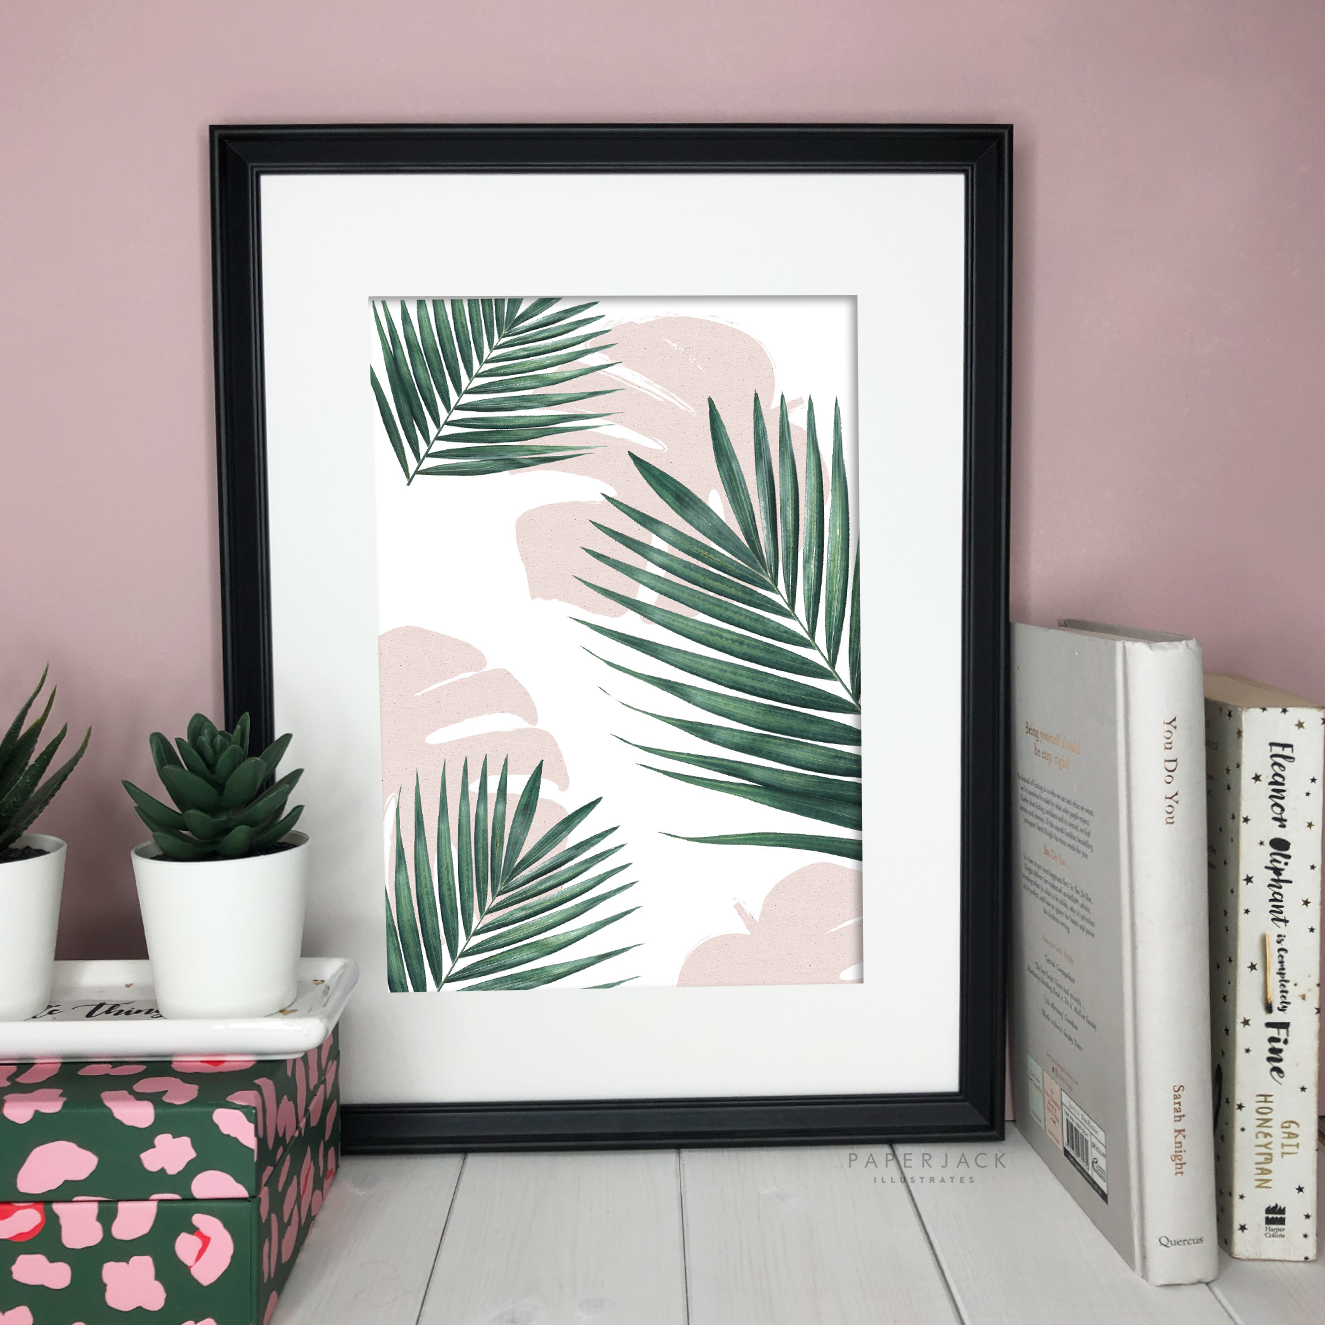 Paperjack Illustrates wall art print - botanical palm leaf print on white background with pink